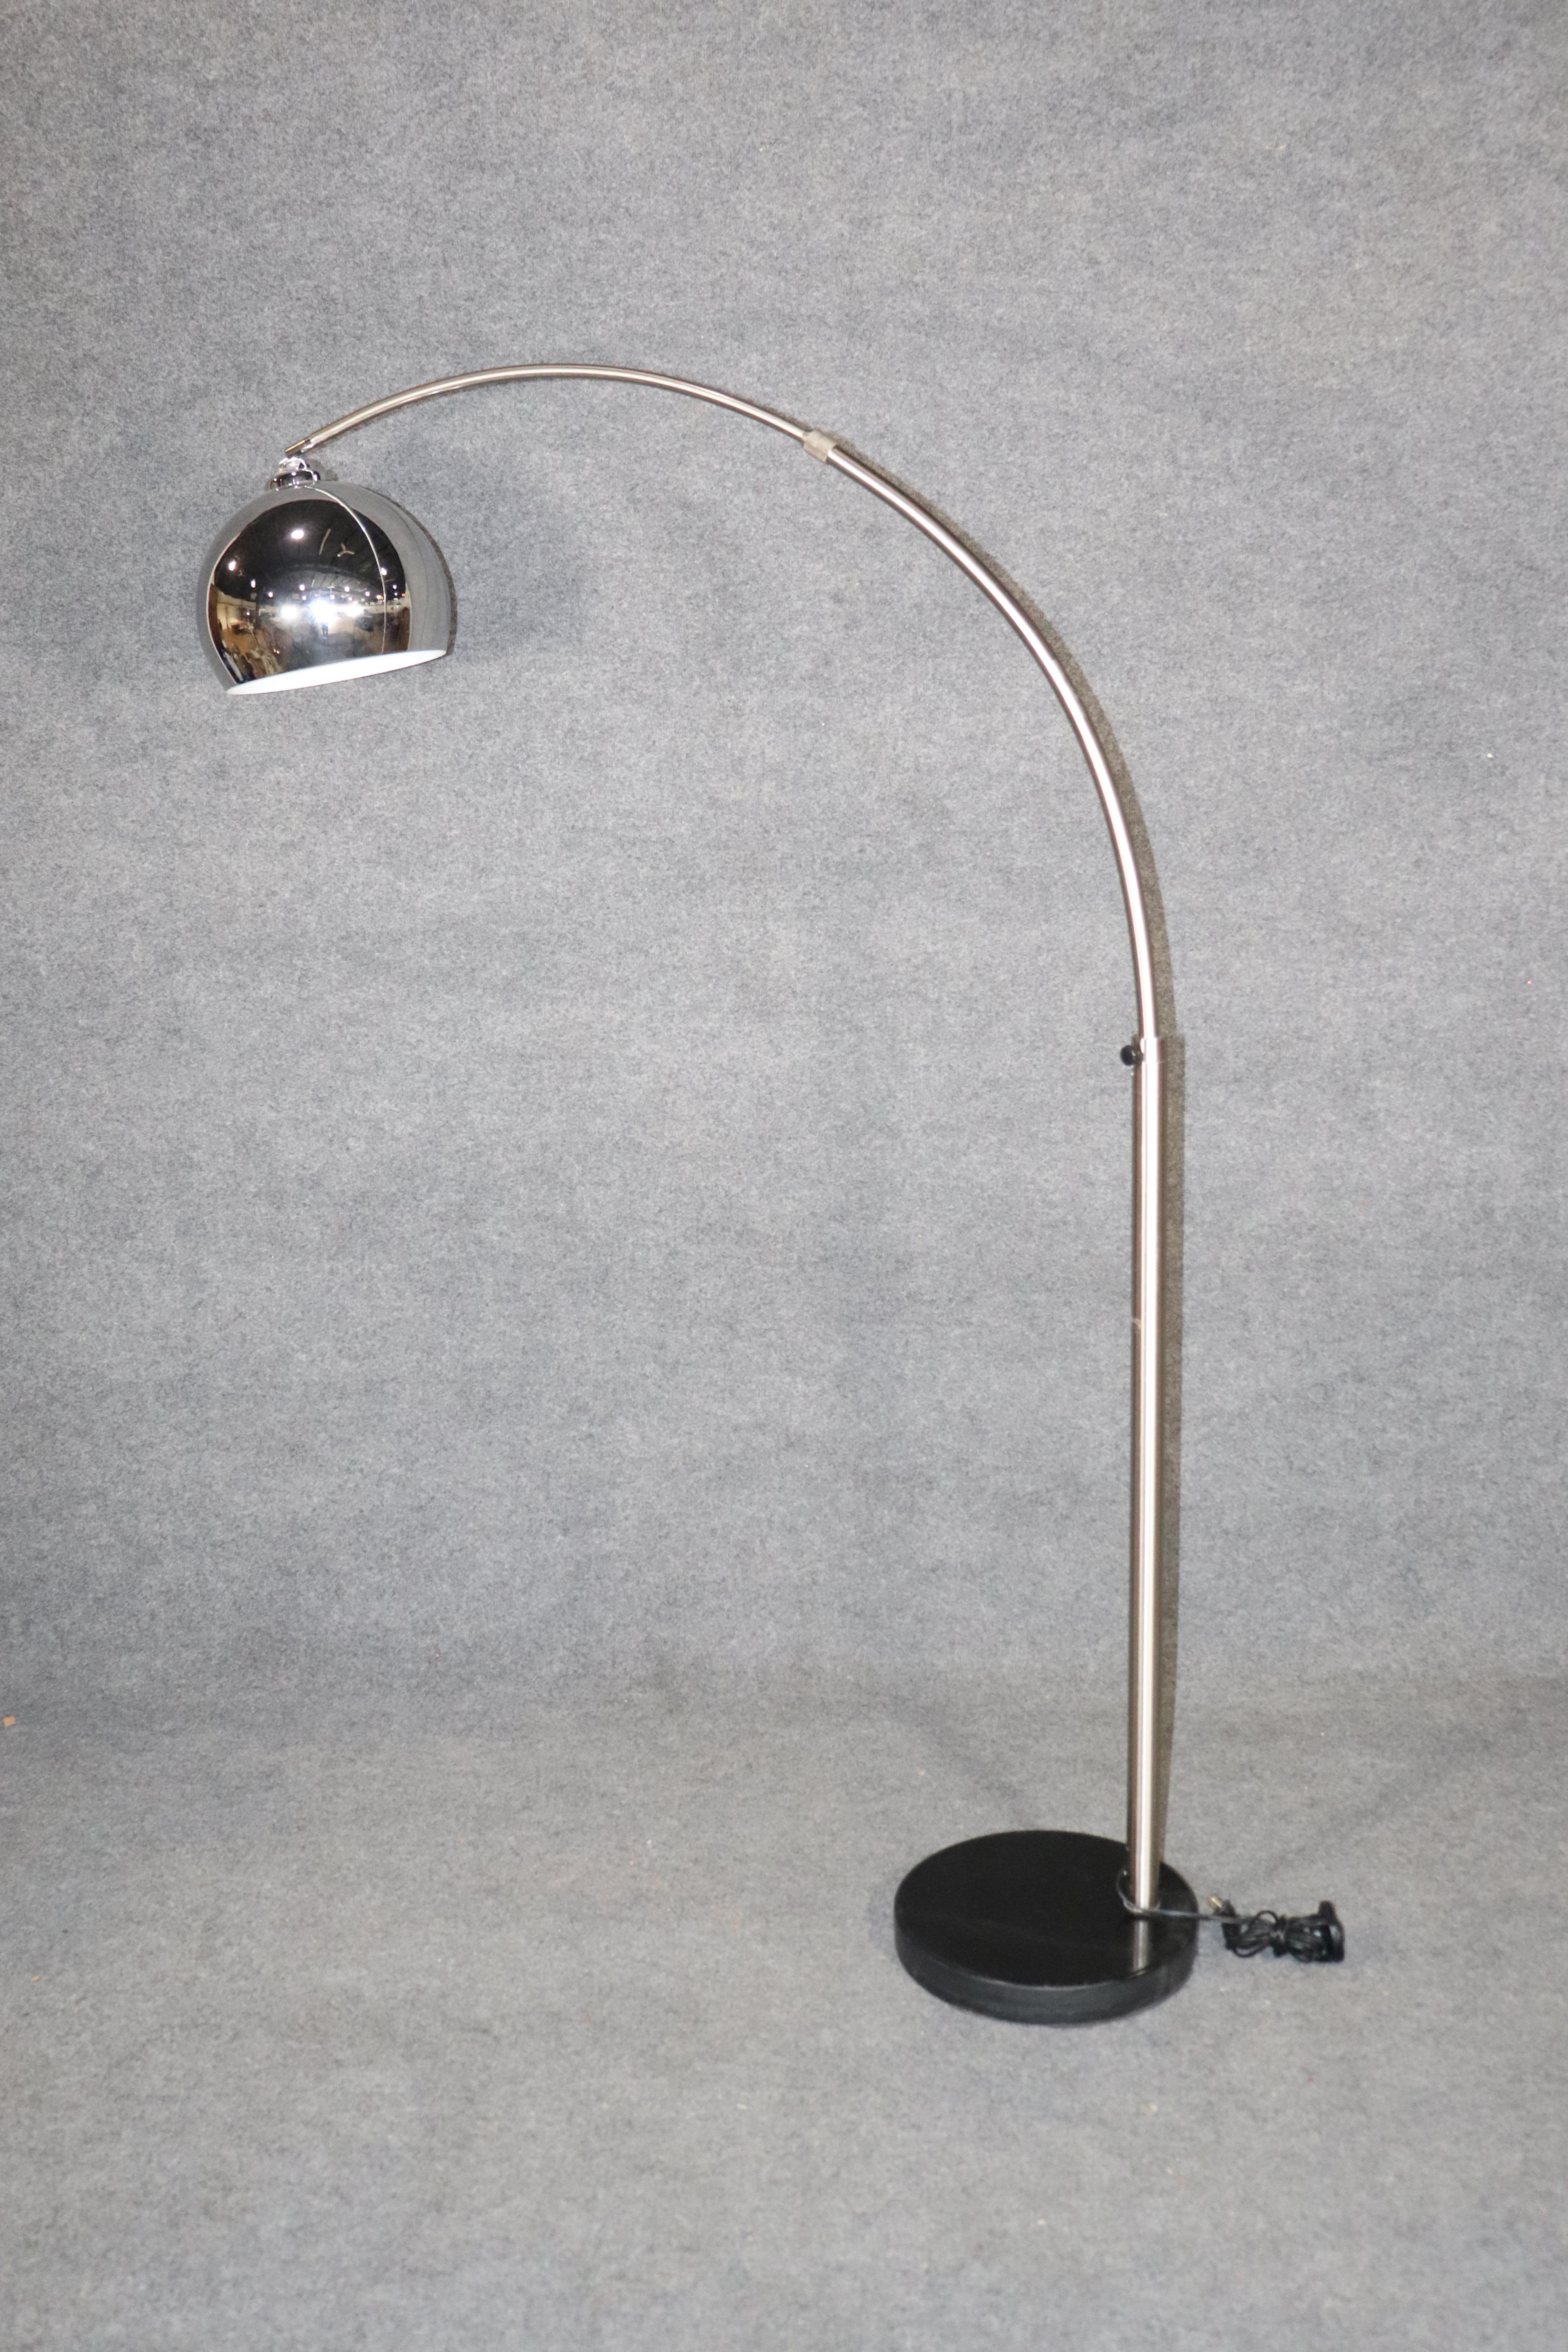 Vintage midcentury arc lamp in polished chrome finish. Adjustable length for use over your sofa.
Please confirm location NY or NJ.